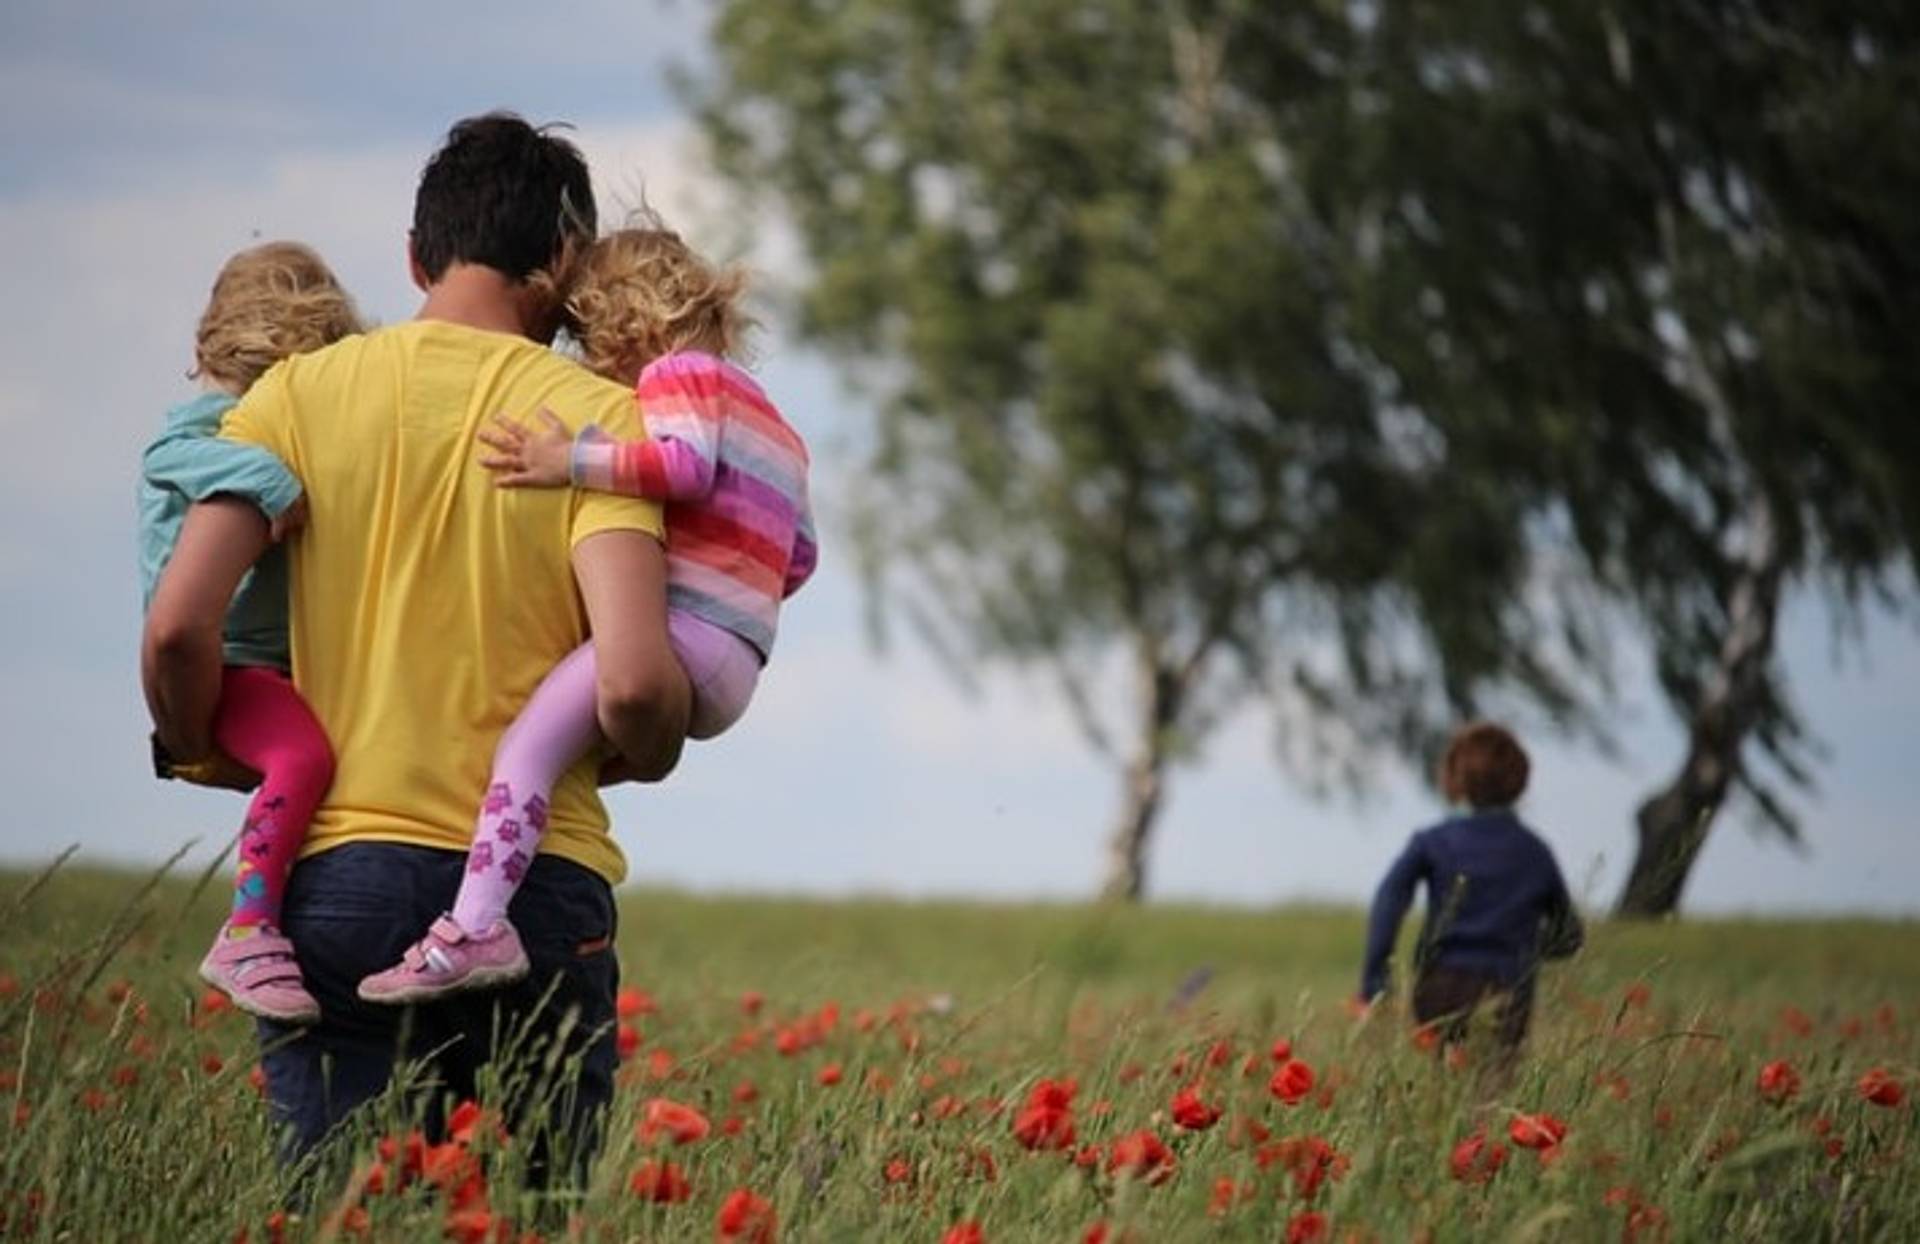 German parents are happier thanks to more equality